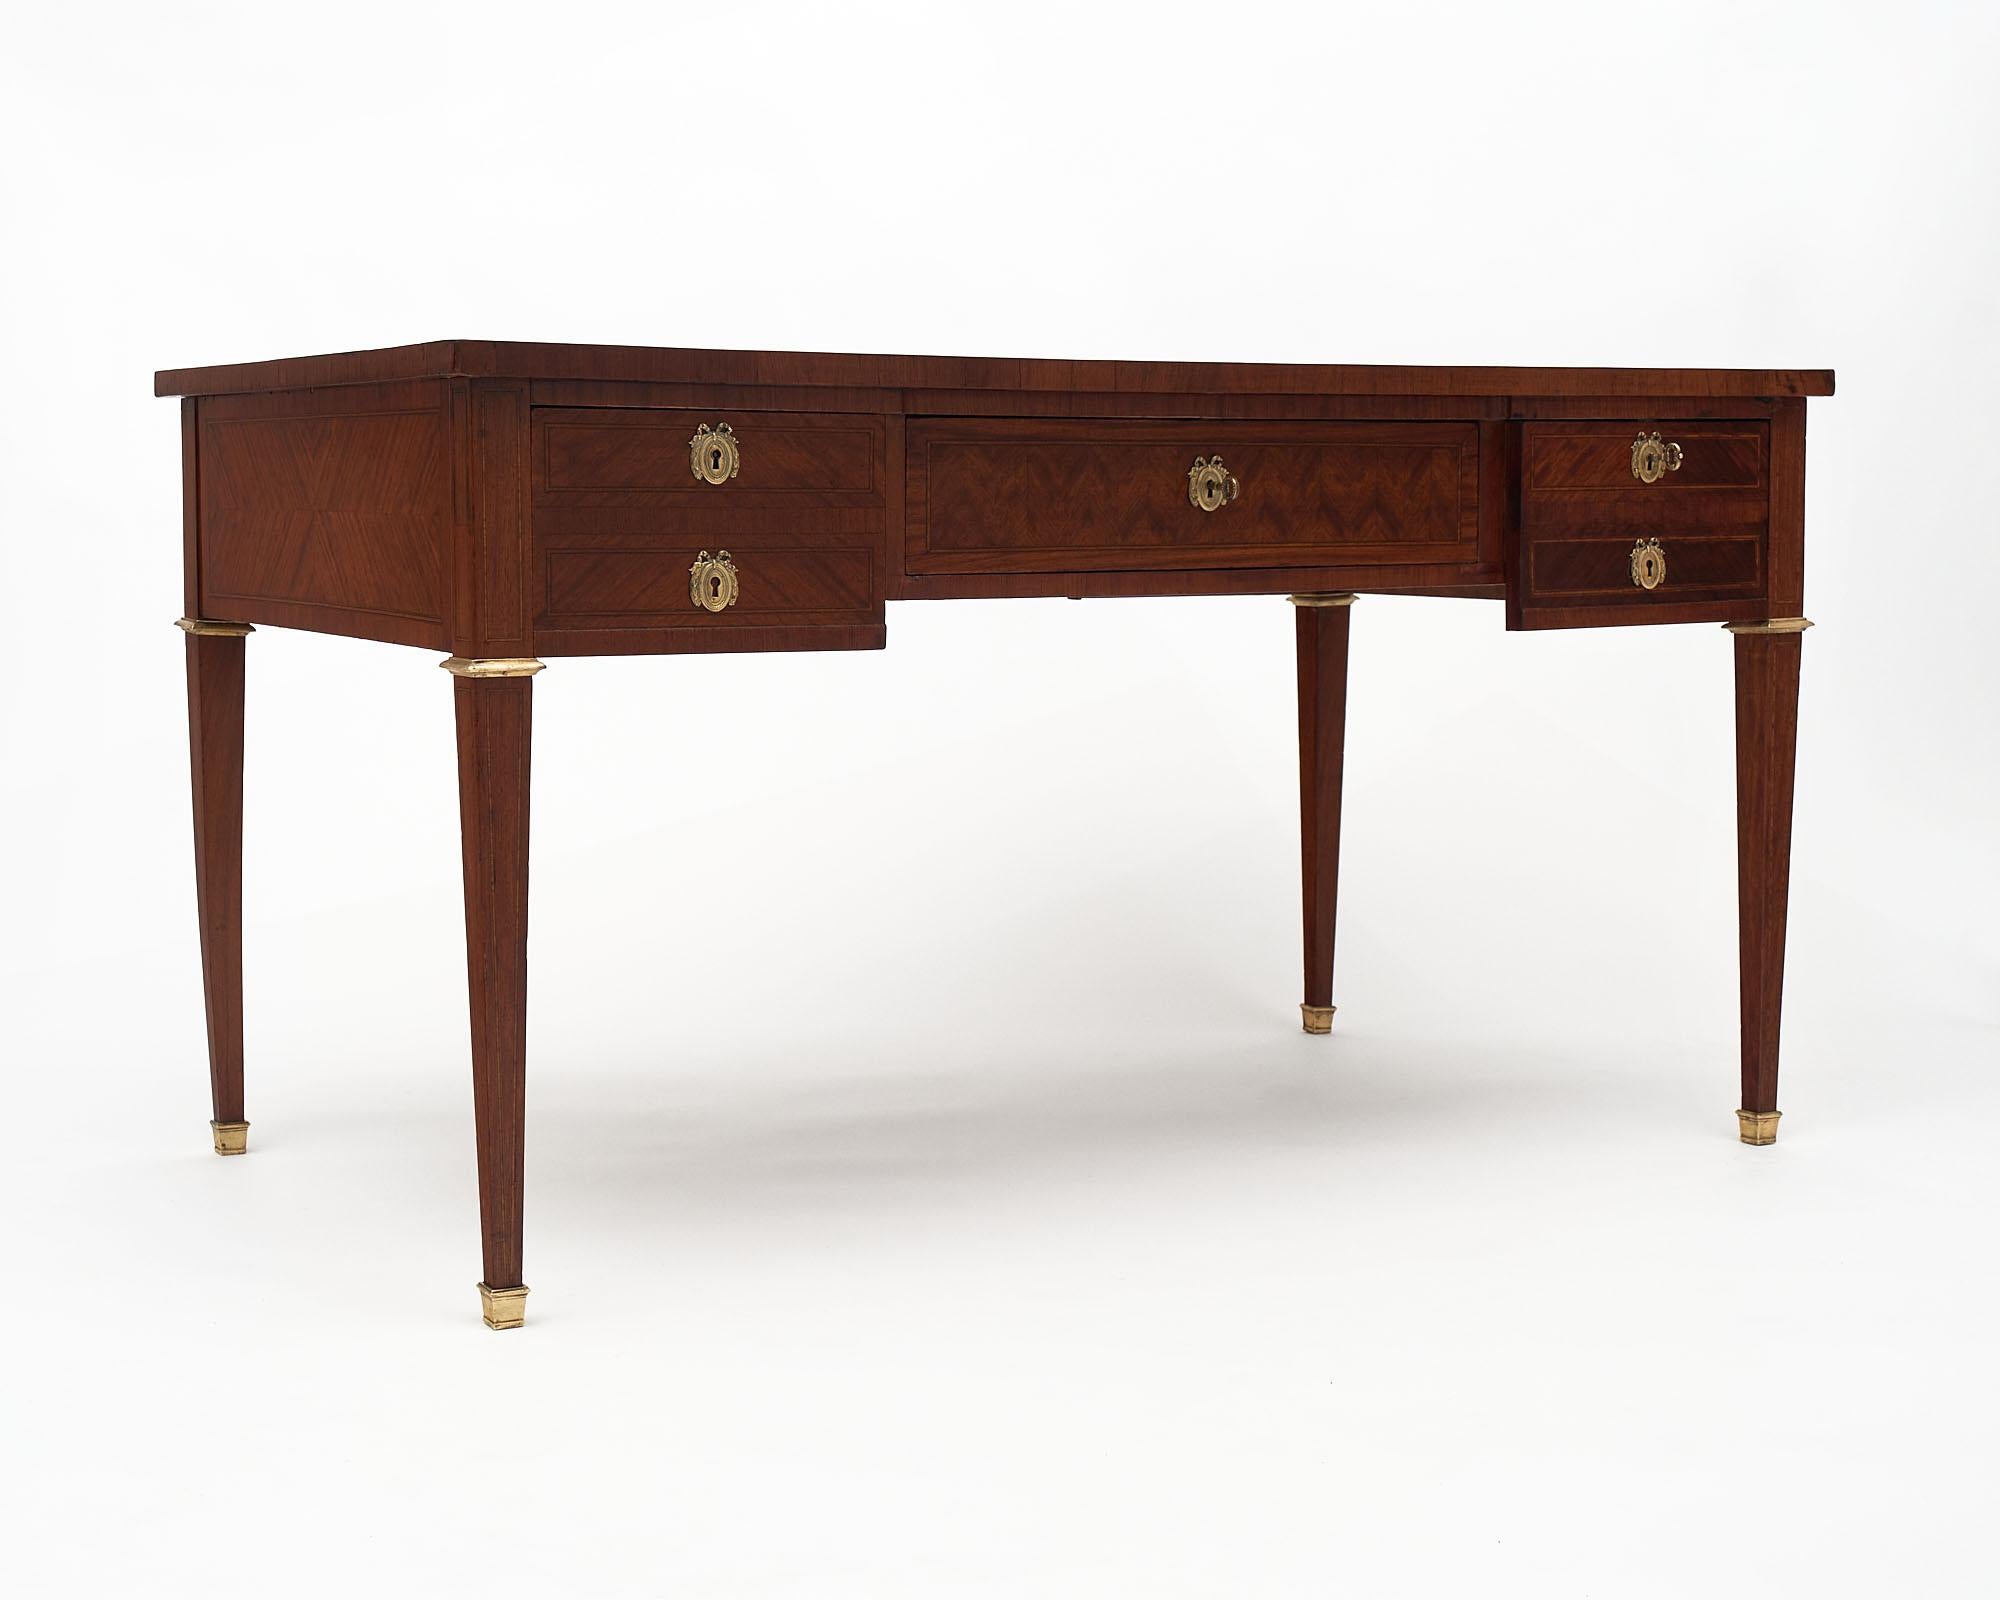 French burled ash desk in the Directoire style, finished in a lustrous museum quality French polish. This work table features five dovetailed drawers adorned with finely cast gilded bronze and a gilt embossed moleskin top.